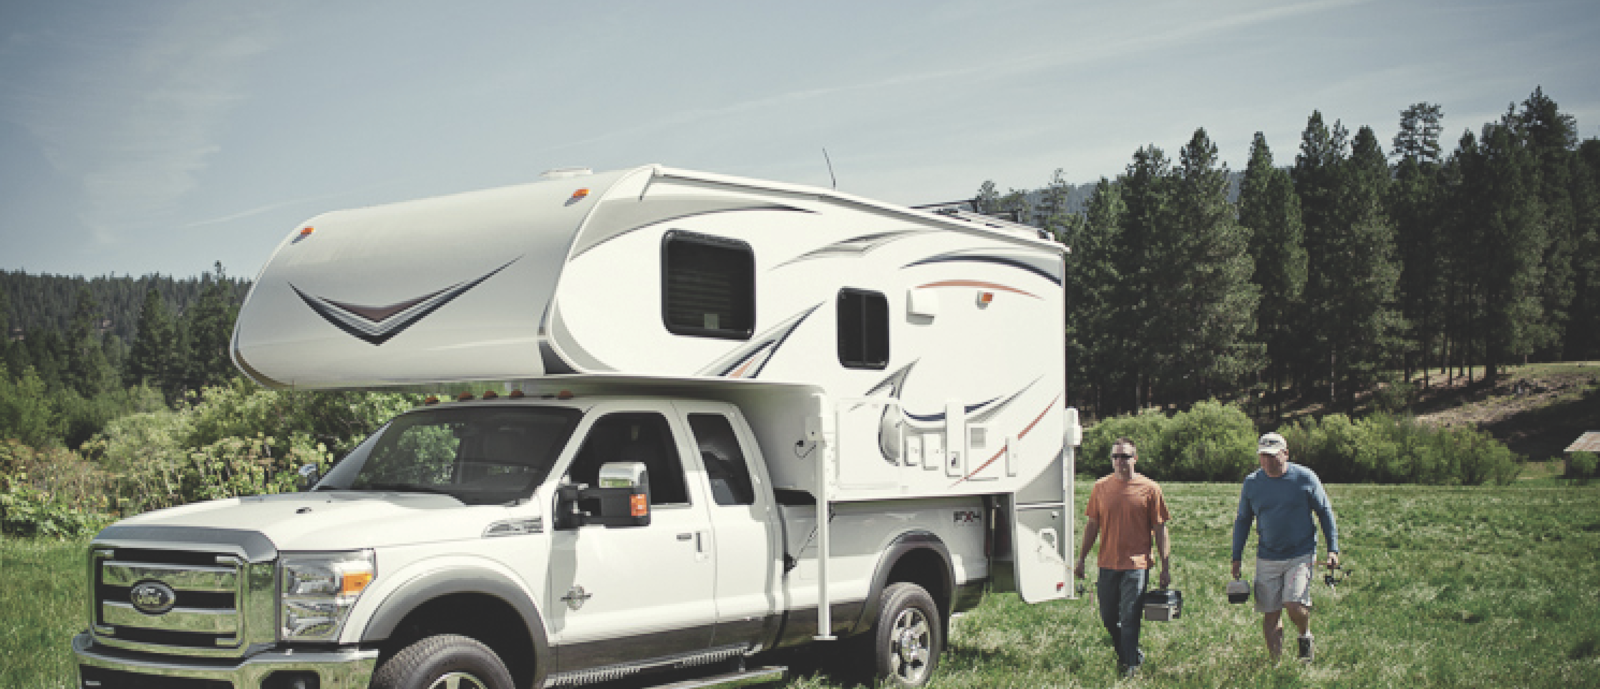 Campers | Go RVing